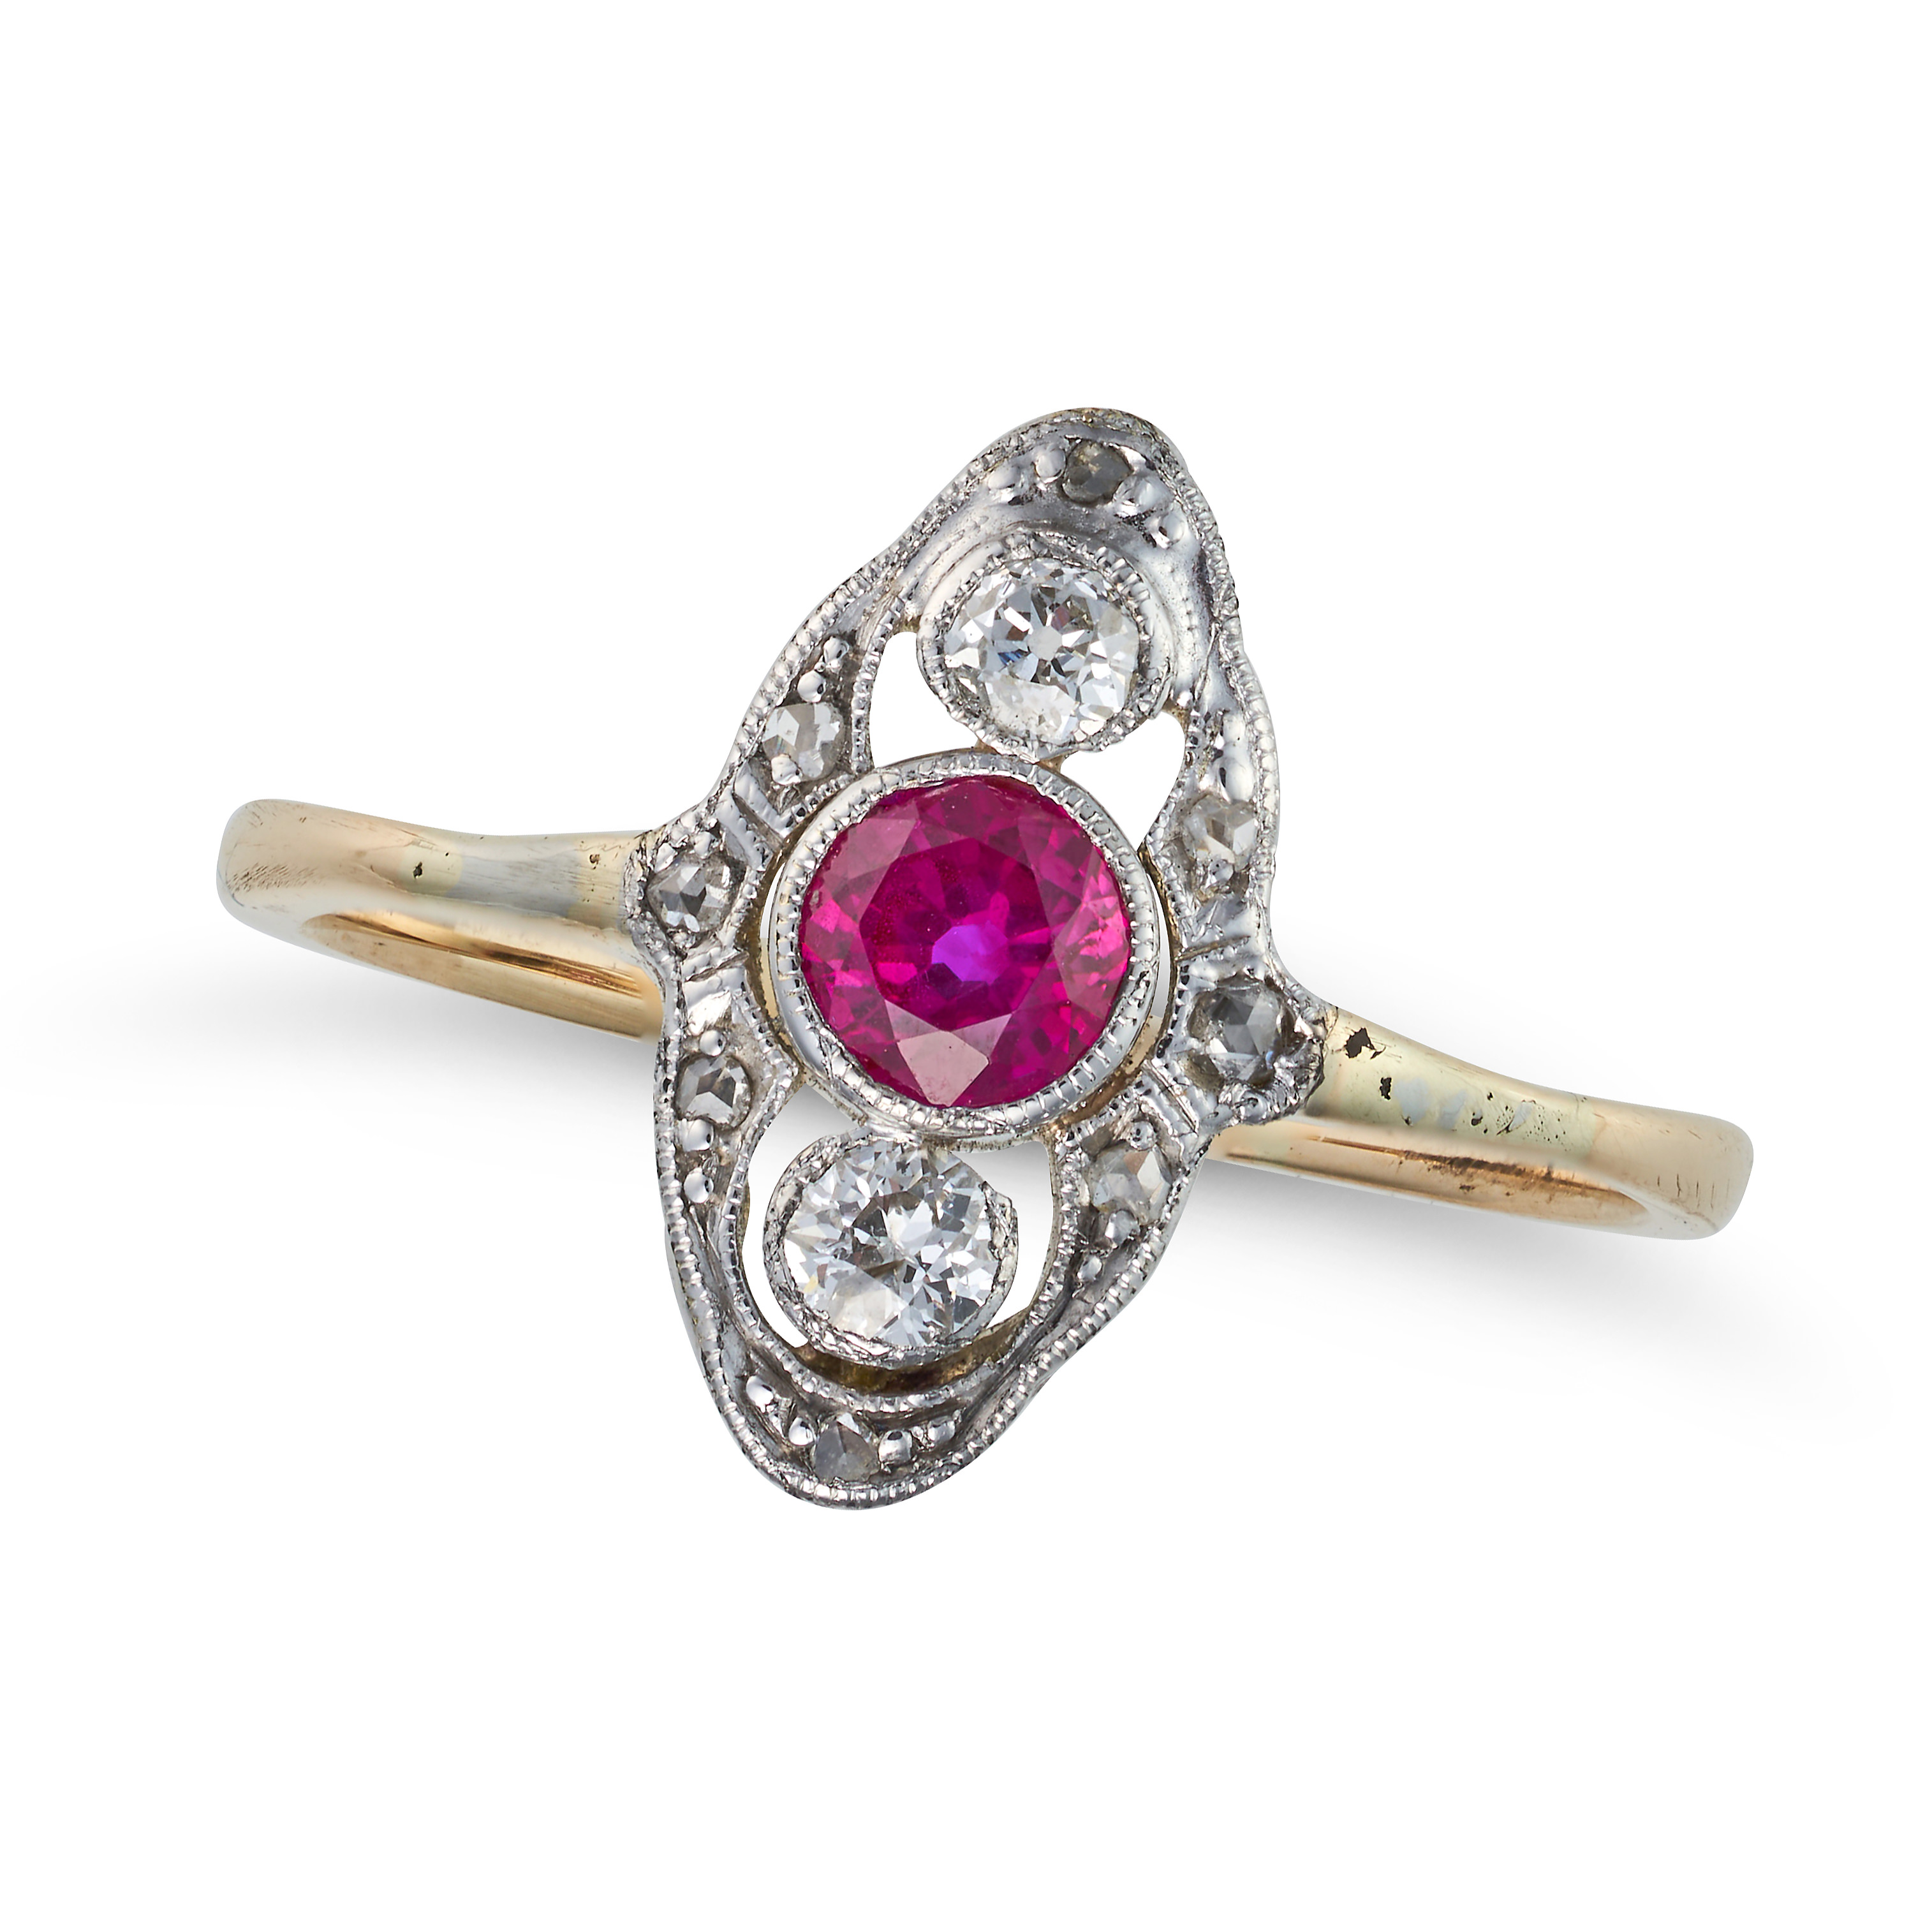 AN ANTIQUE RUBY AND DIAMOND NAVETTE RING the navette face set with a round cut ruby of approximat...